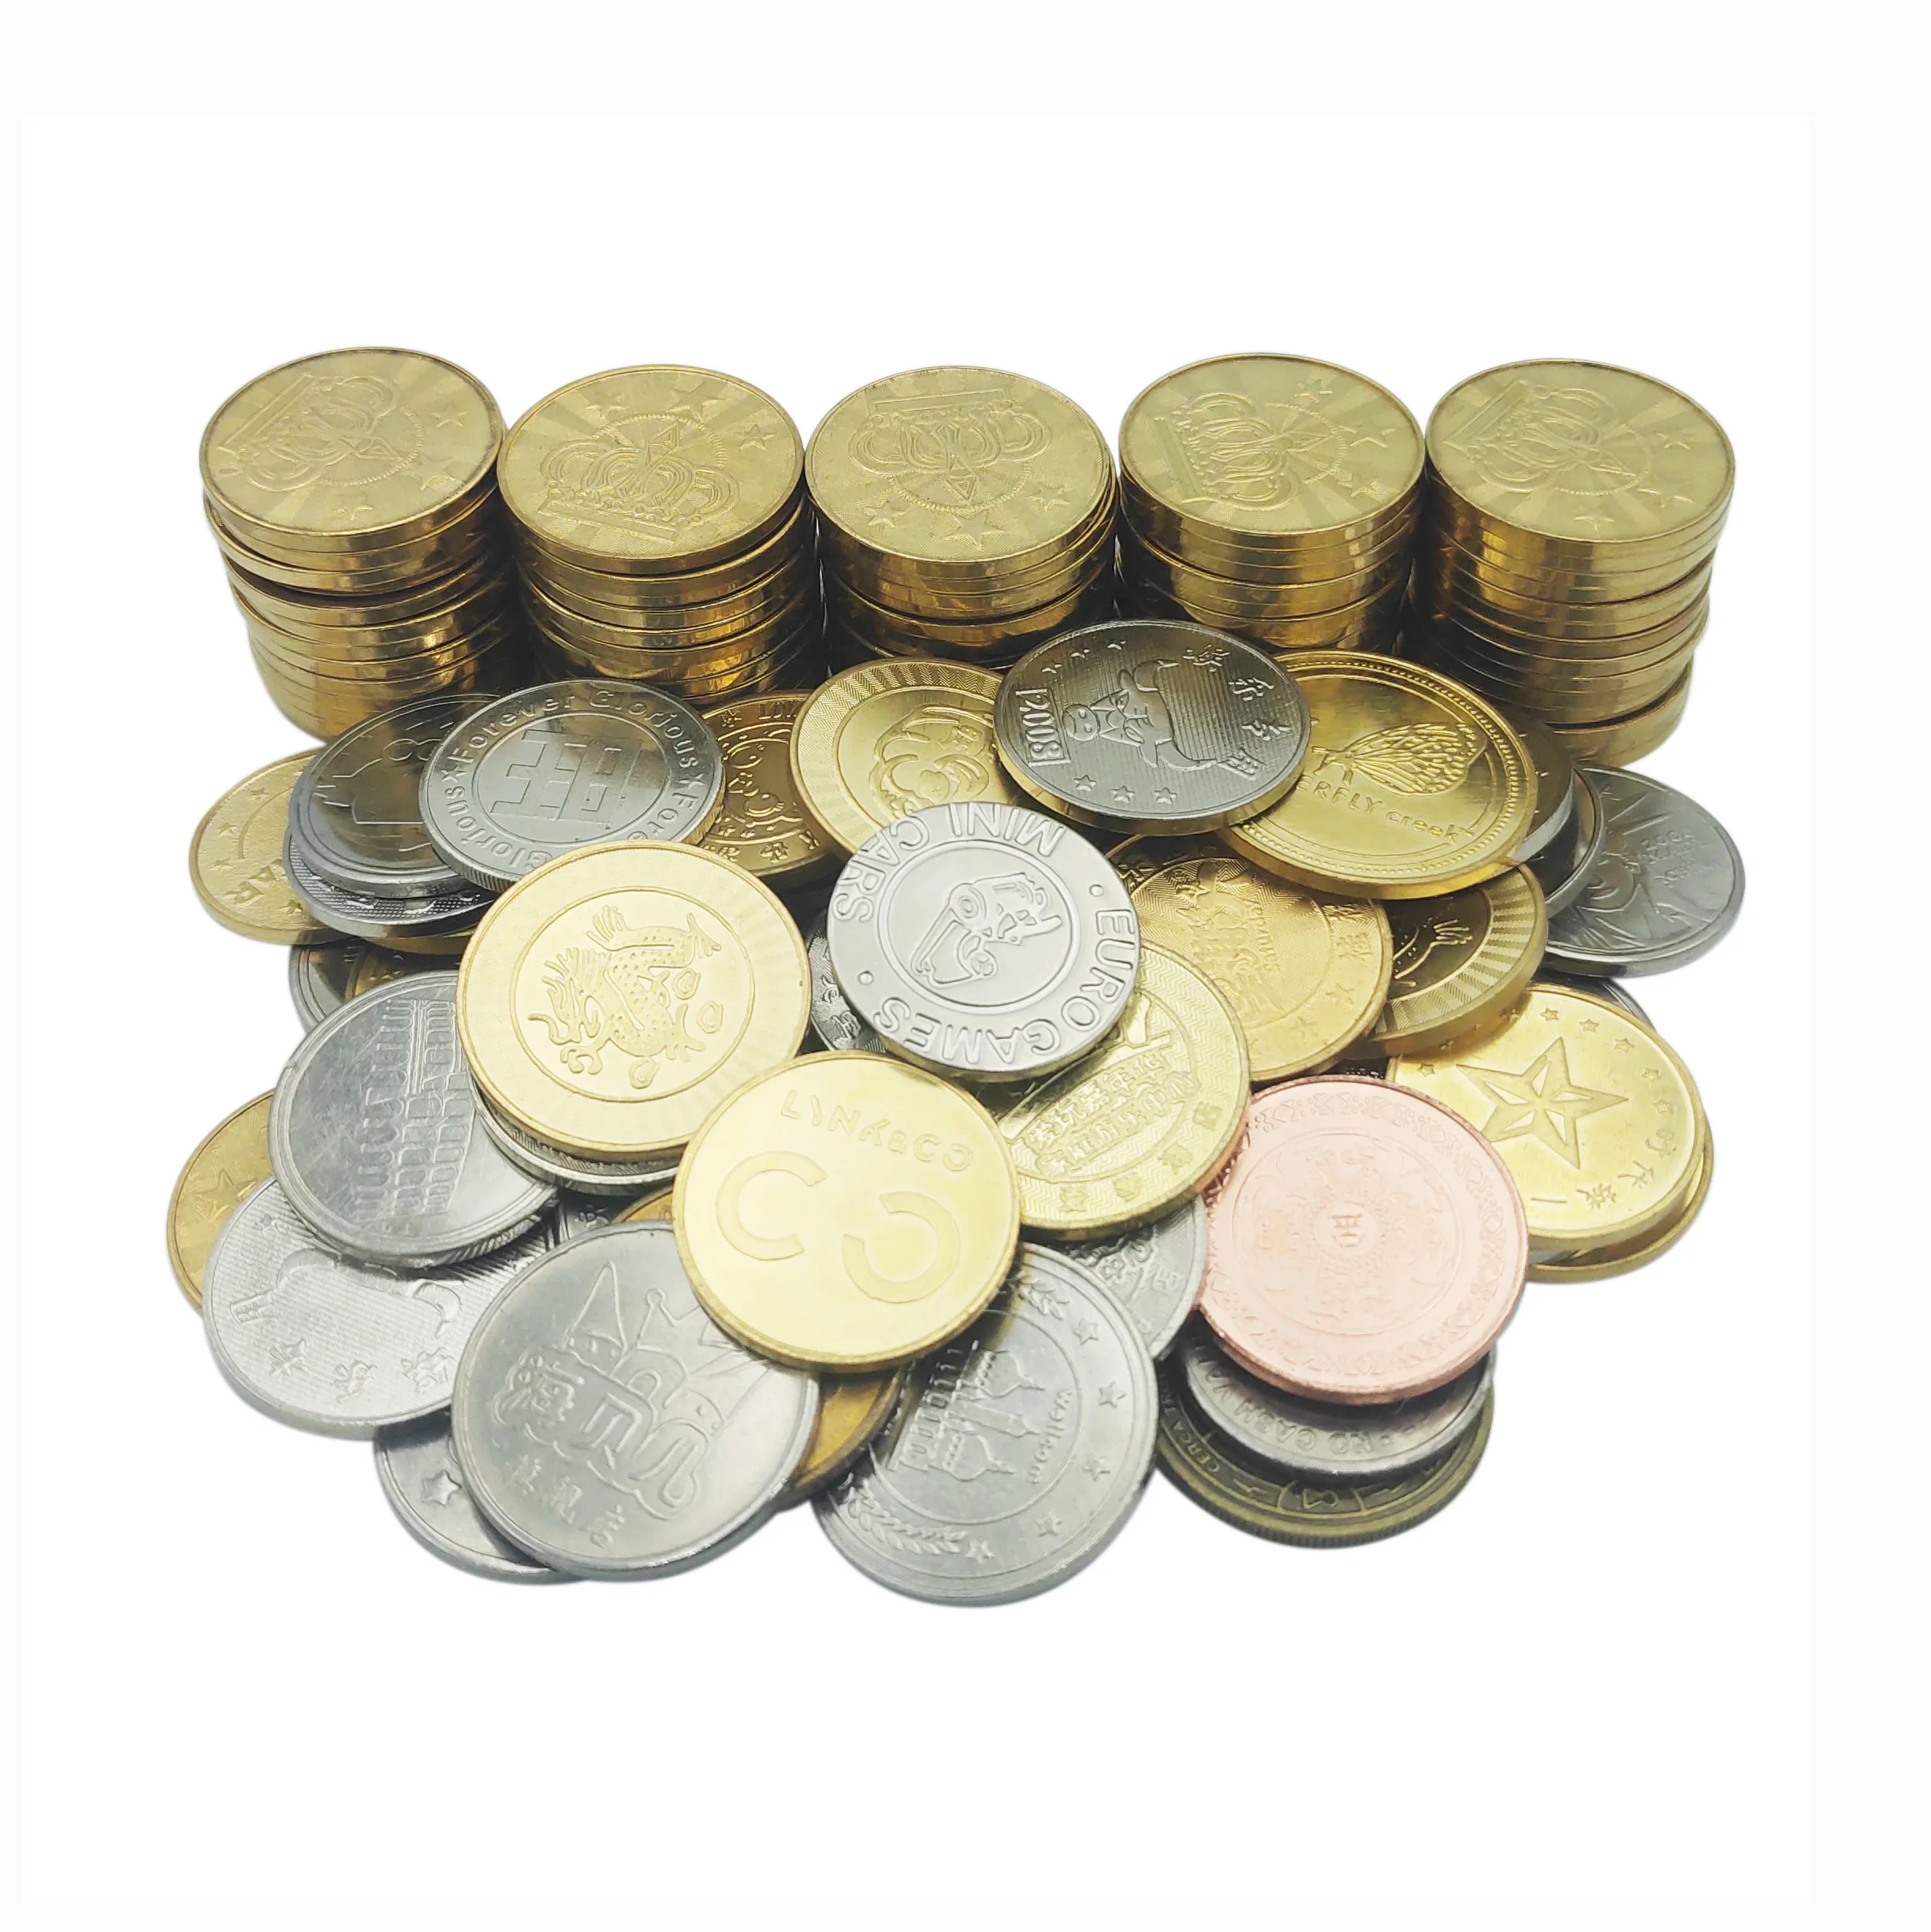 

Wholesale customized laundry amusement custom arcade game token coin metal game coins for coin operated vending machine token, Silver, gold or other colors